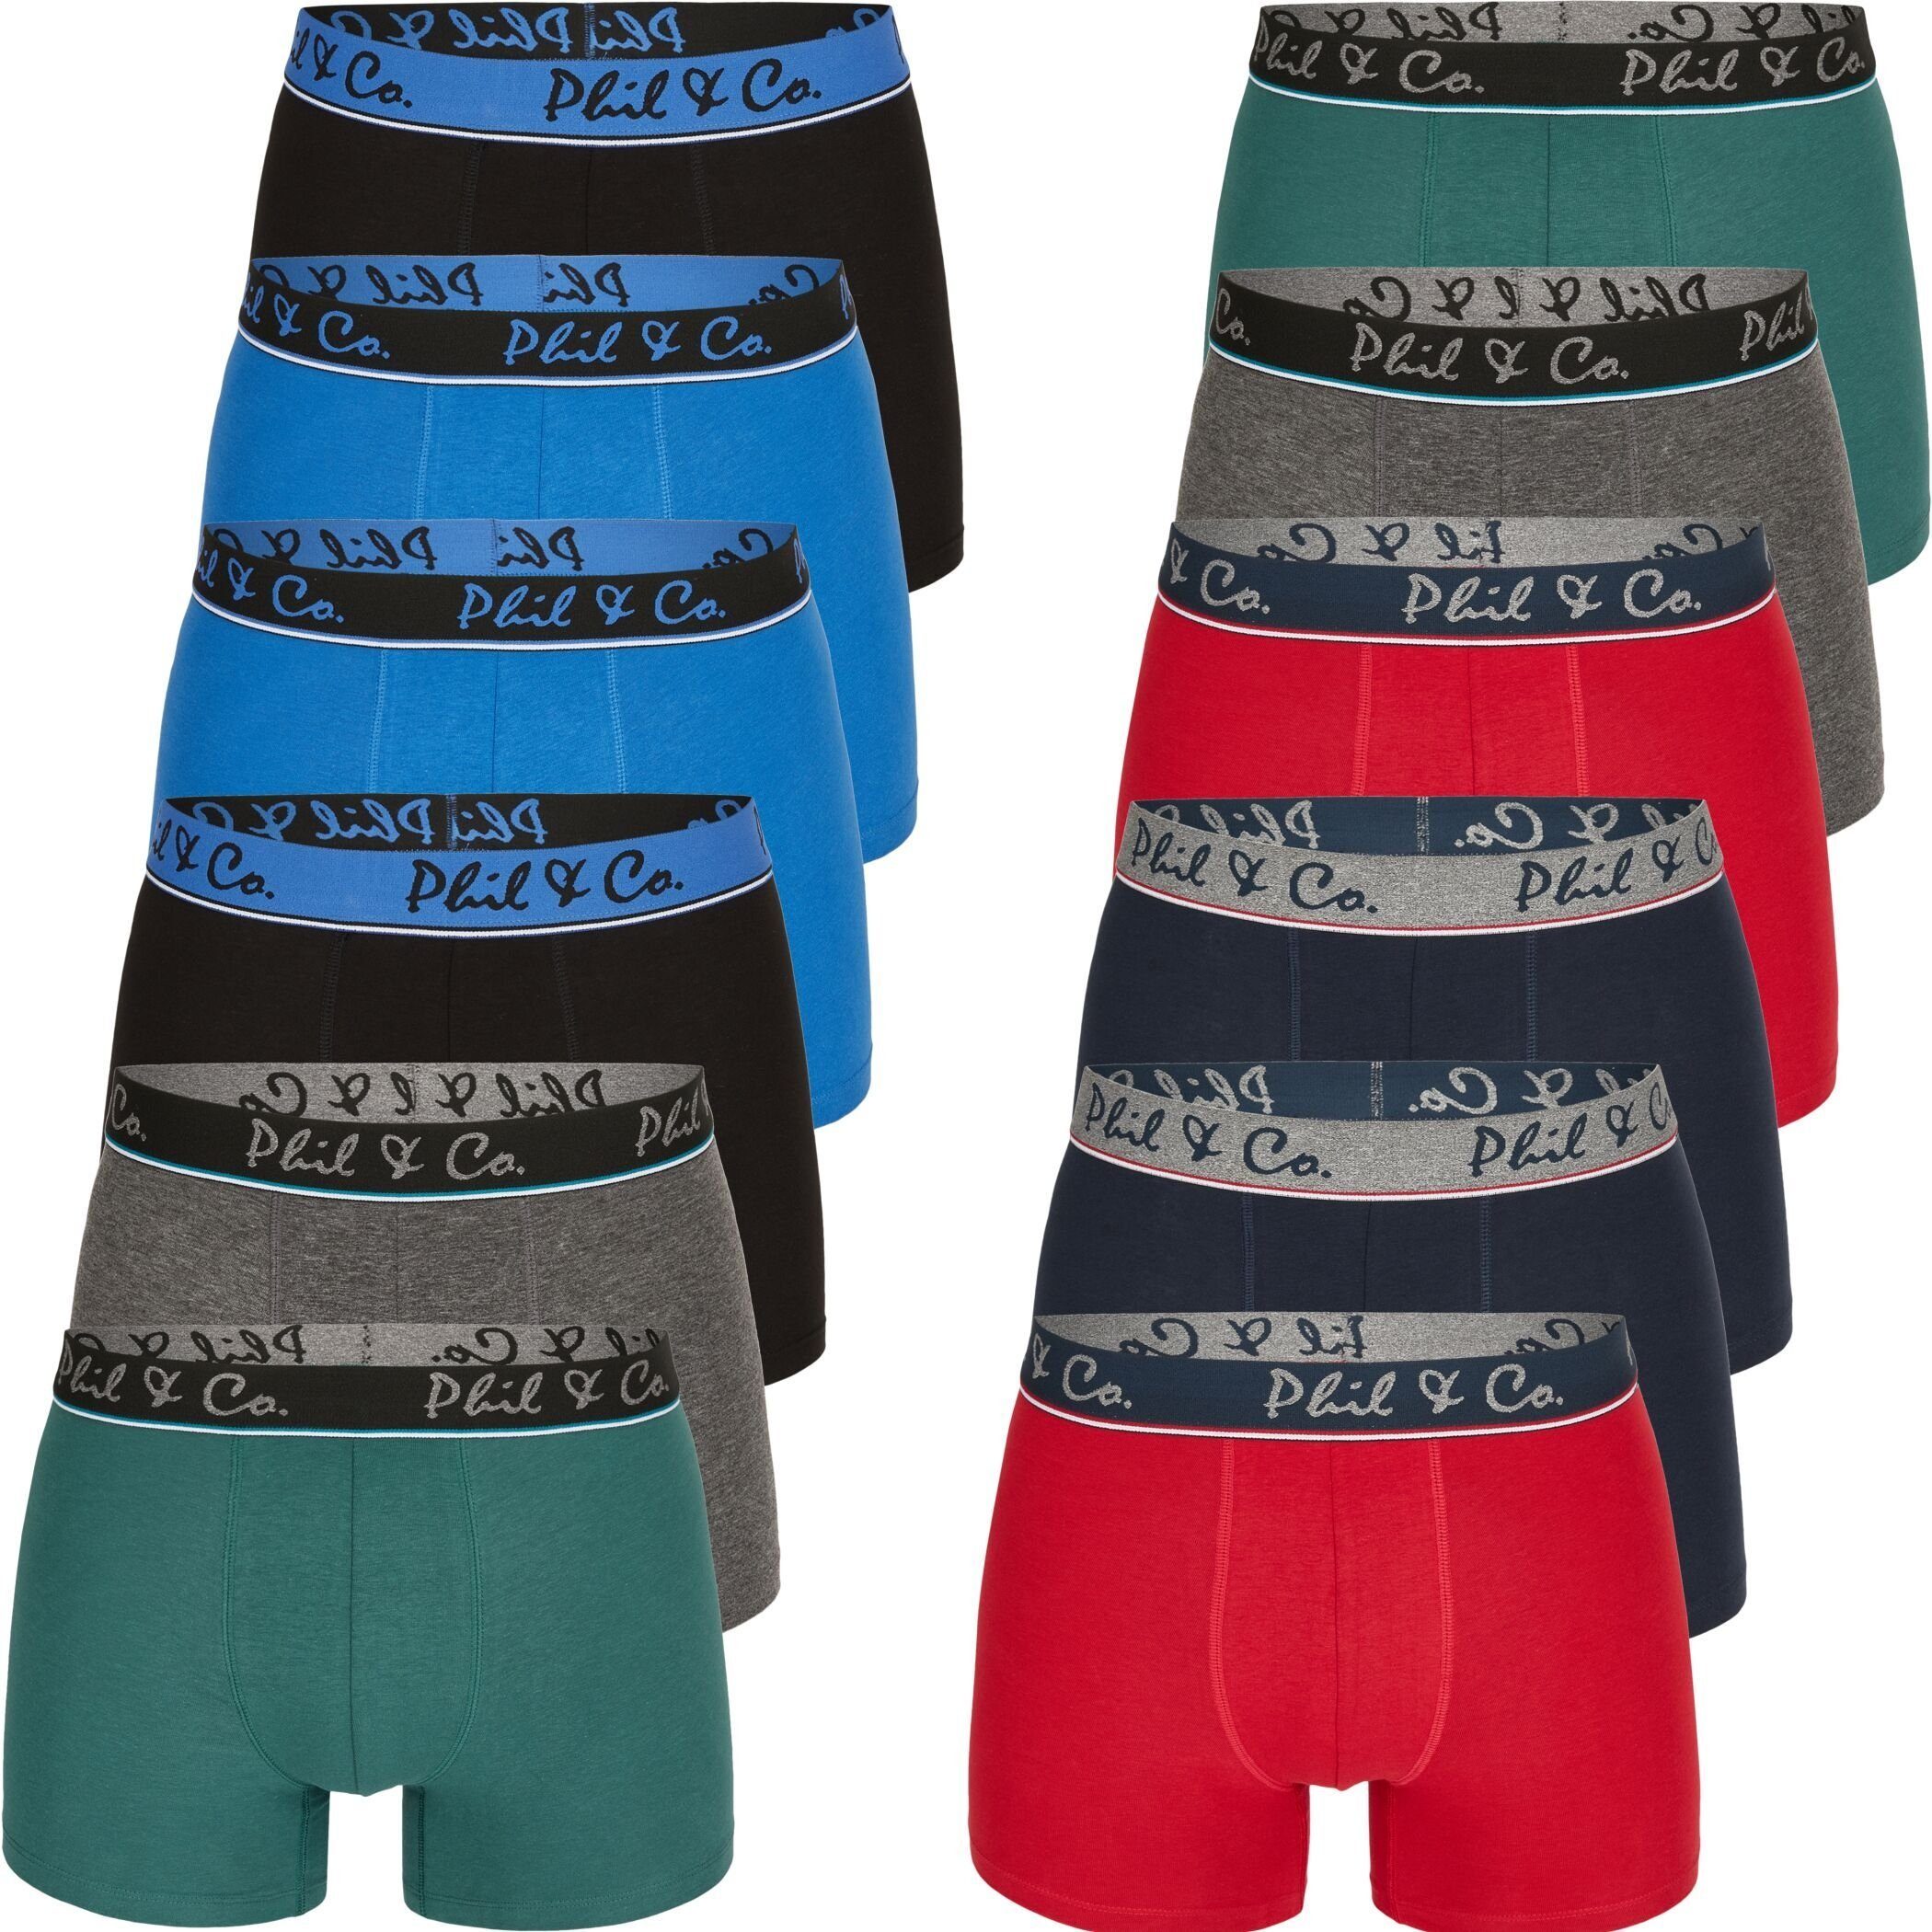 Jersey DESIGN Co Berlin Boxershorts Phil FARBWAHL 06 Phil Co. (1-St) Pant Boxershorts & Pack 12 & Short Trunk